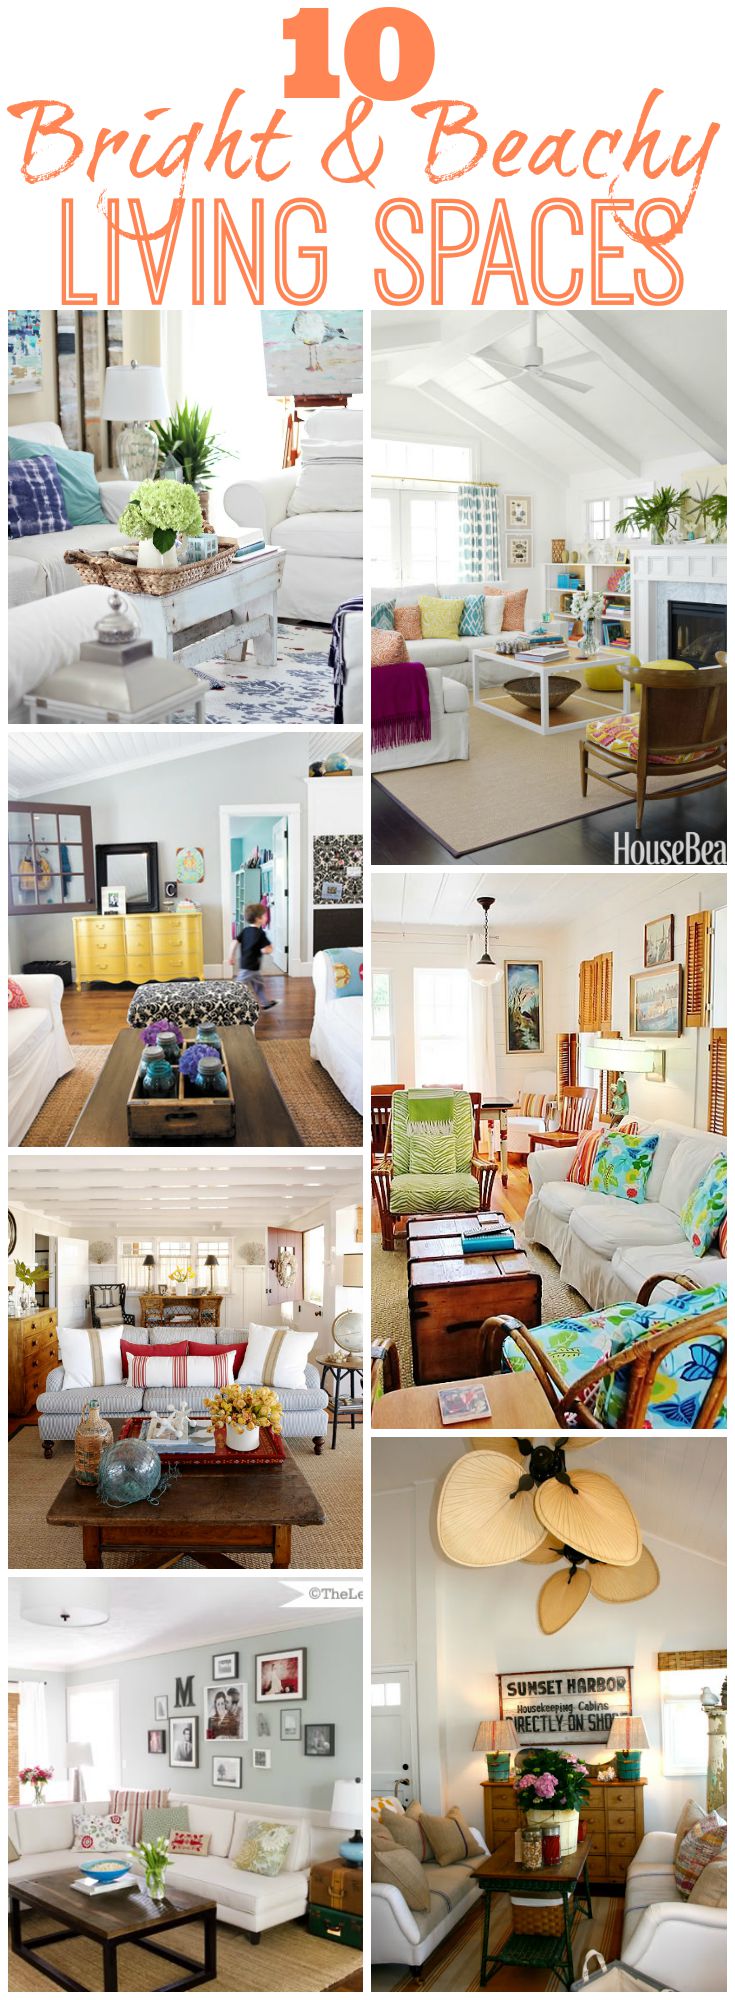 10 bright and beachy living spaces at thehappyhousie.com graphic.